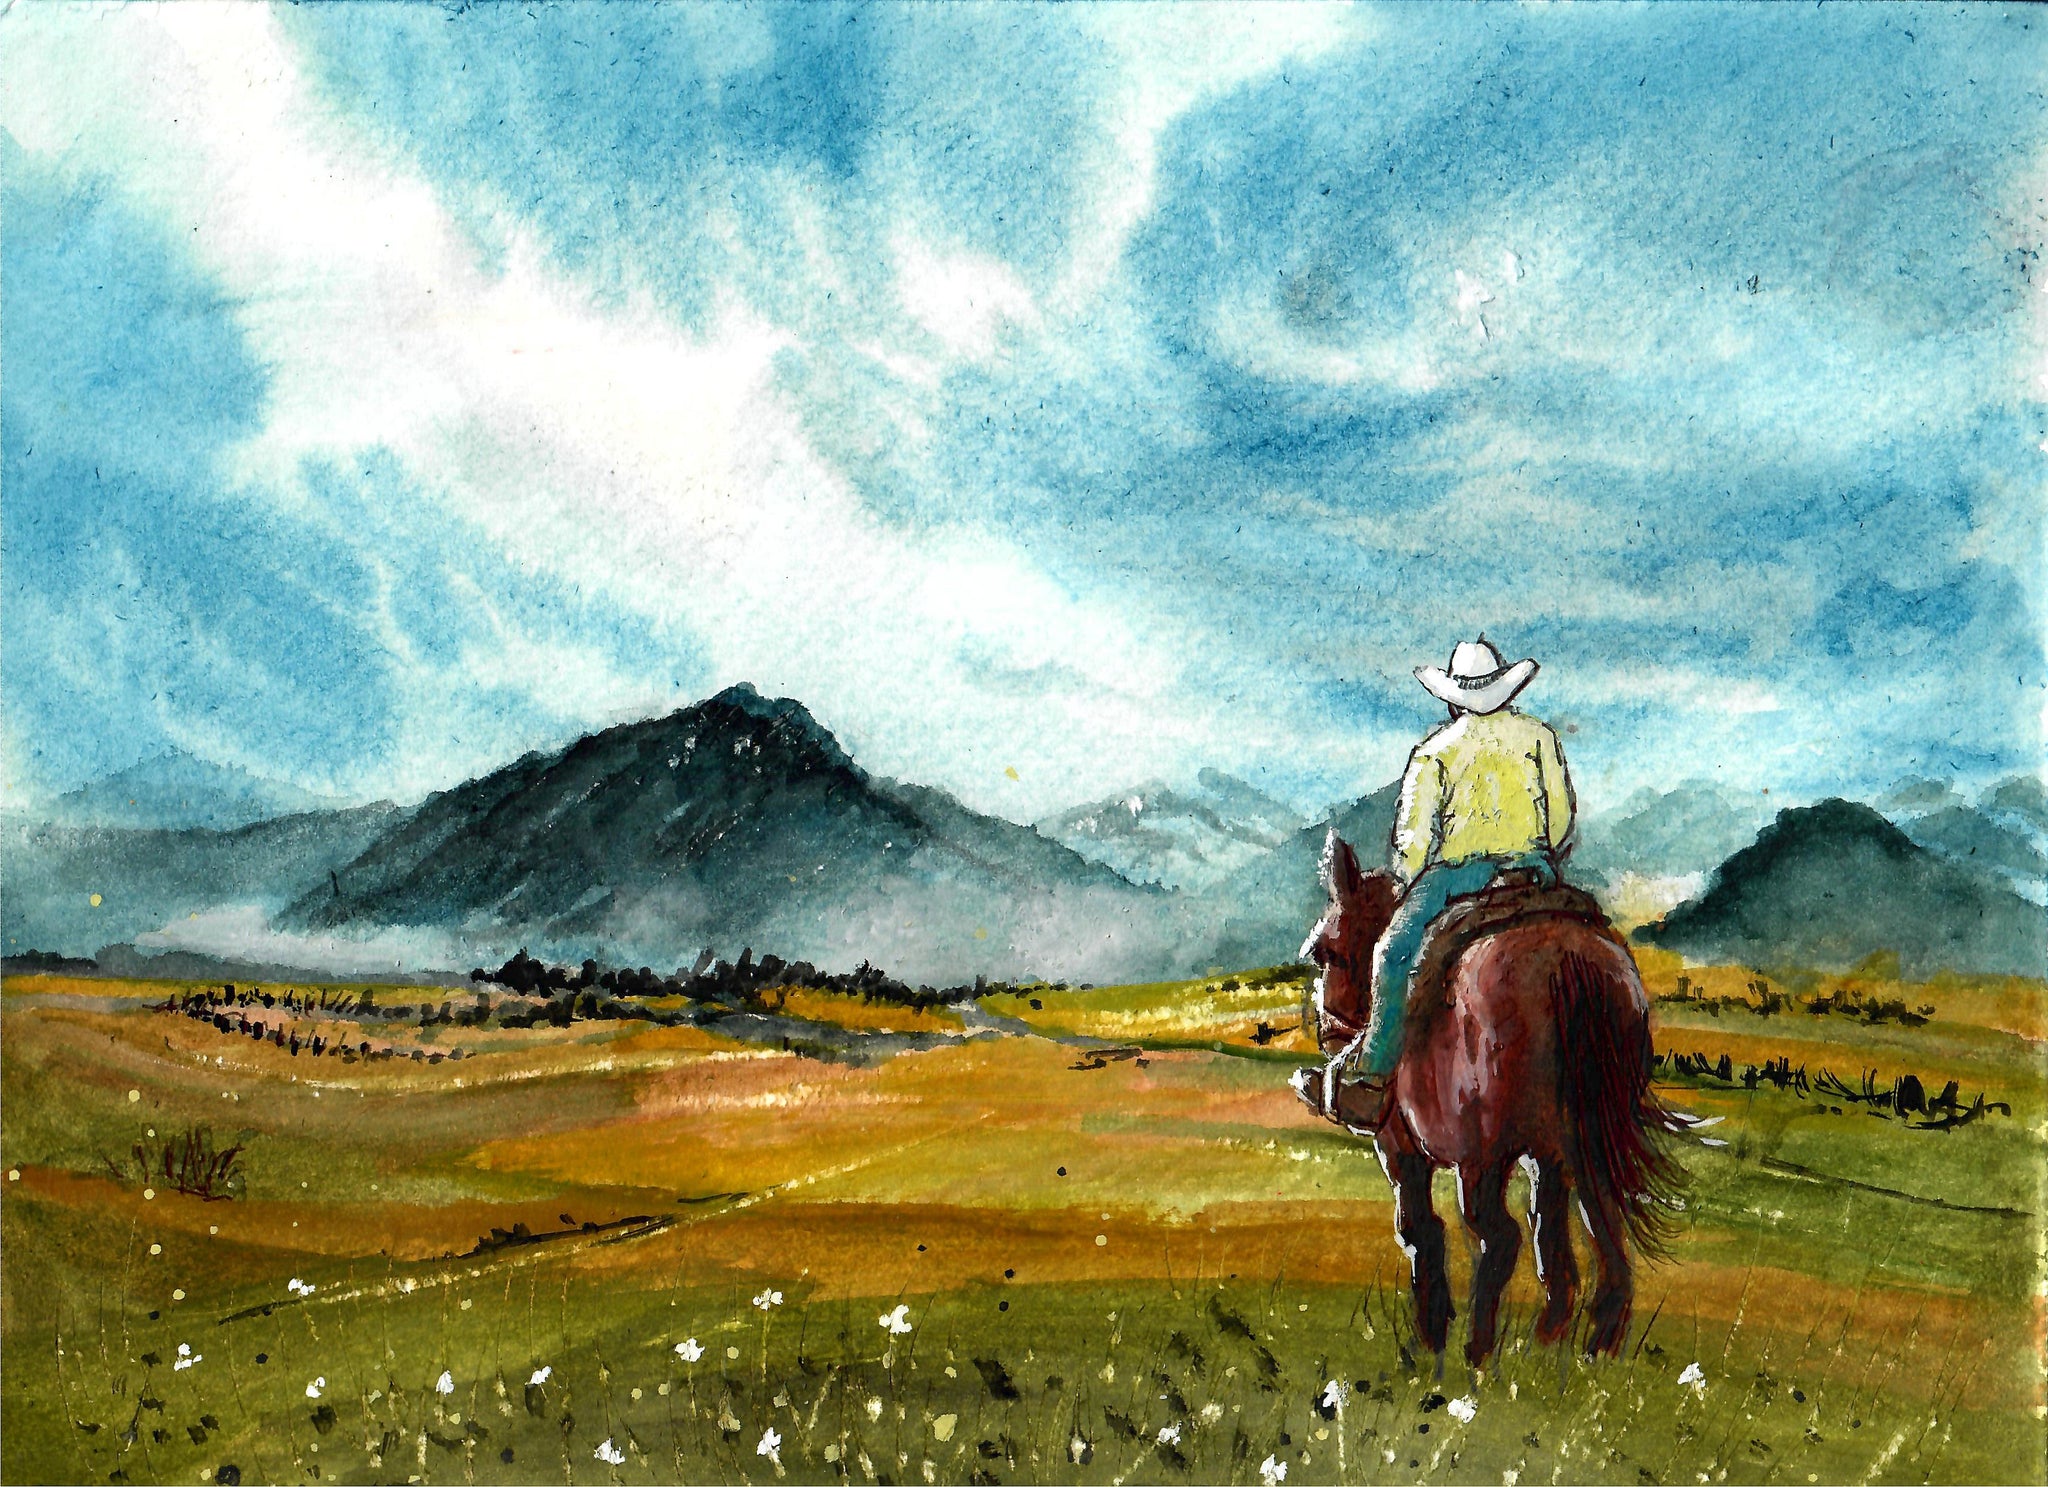 Western - Cowboy And Distant Mountains, Beautiful Mountains, Misty Mountains, Cowboy Art